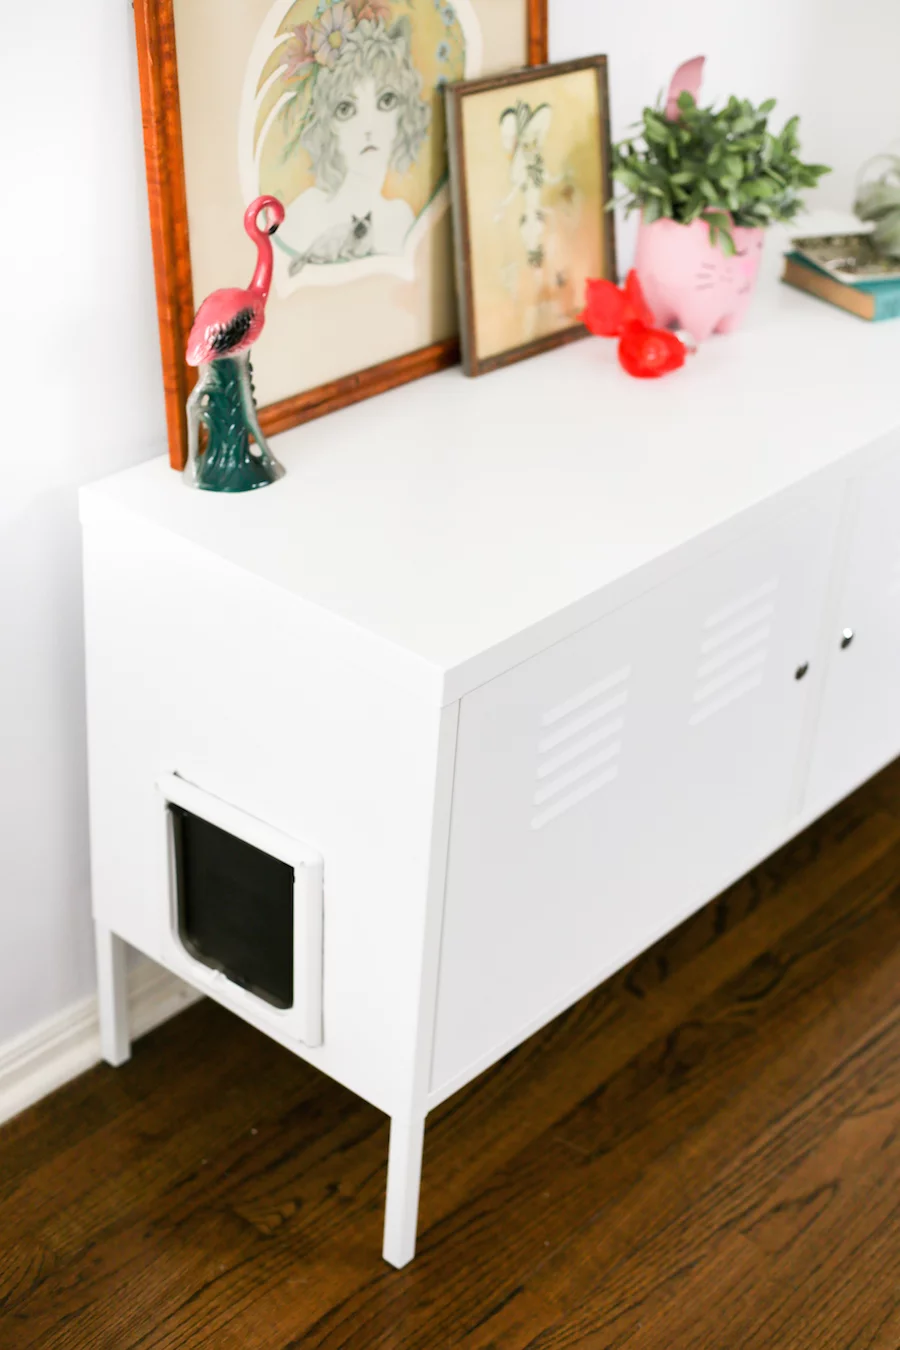 Turn the Ikea PS Cabinet into a giant kitty litter box so you never have to look at litter again! // Salty Canary